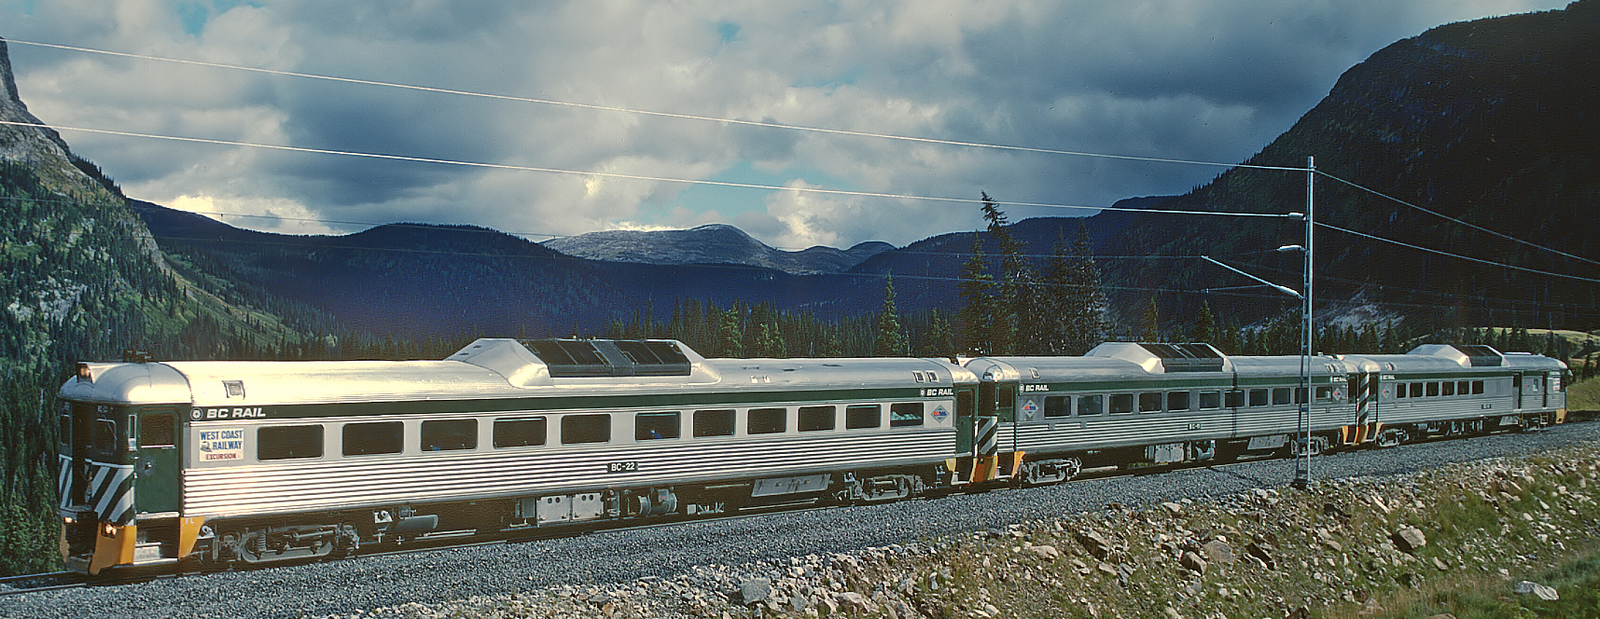 Triple unit of BC Rail as the “West Coast Railway Excursion Special” in September 1987 near Whitford, British Columbia